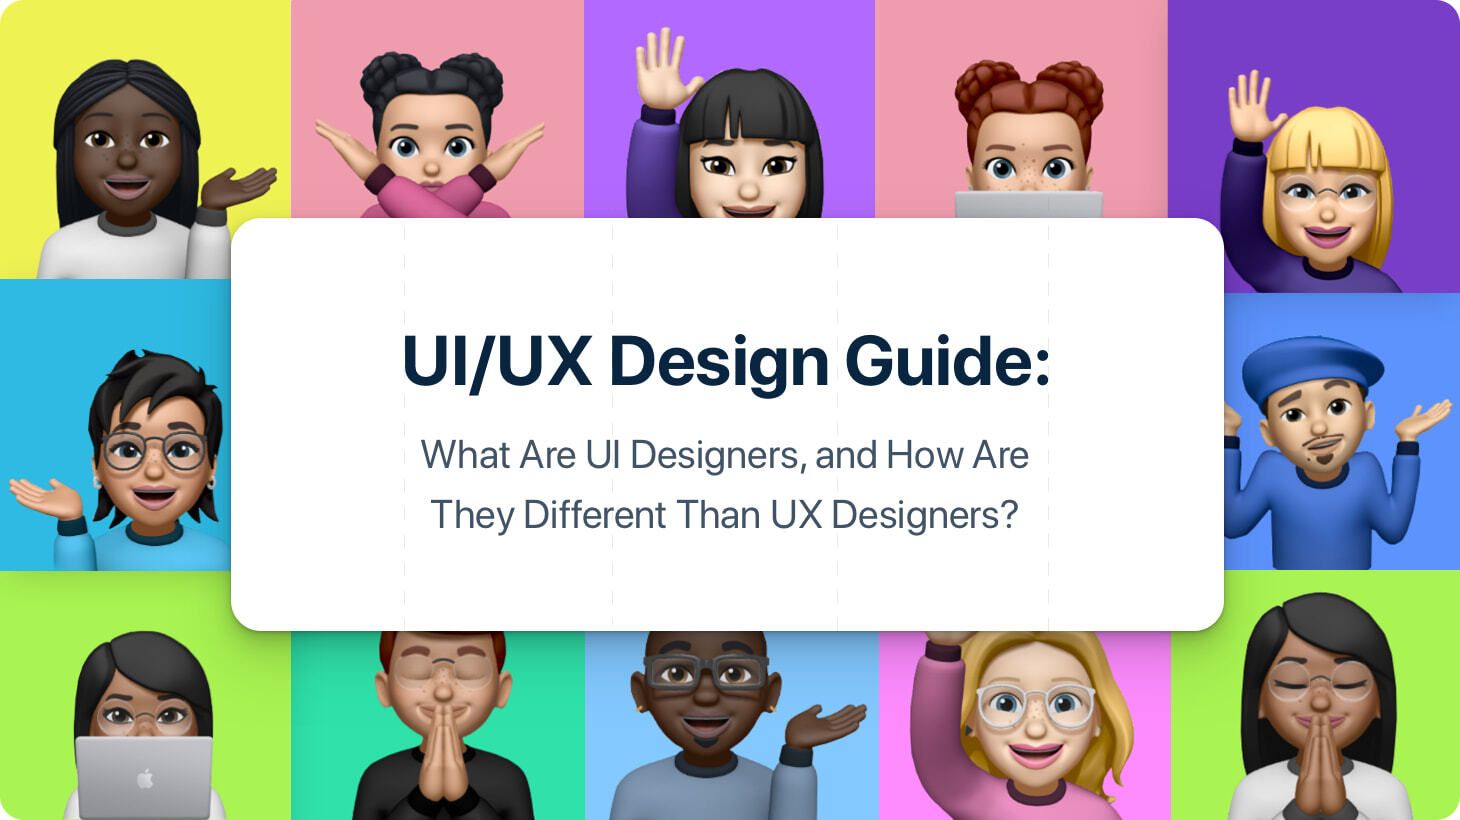 UI/UX Design Guide: What Are UI Designers, and How Are They Different Than UX Designers?